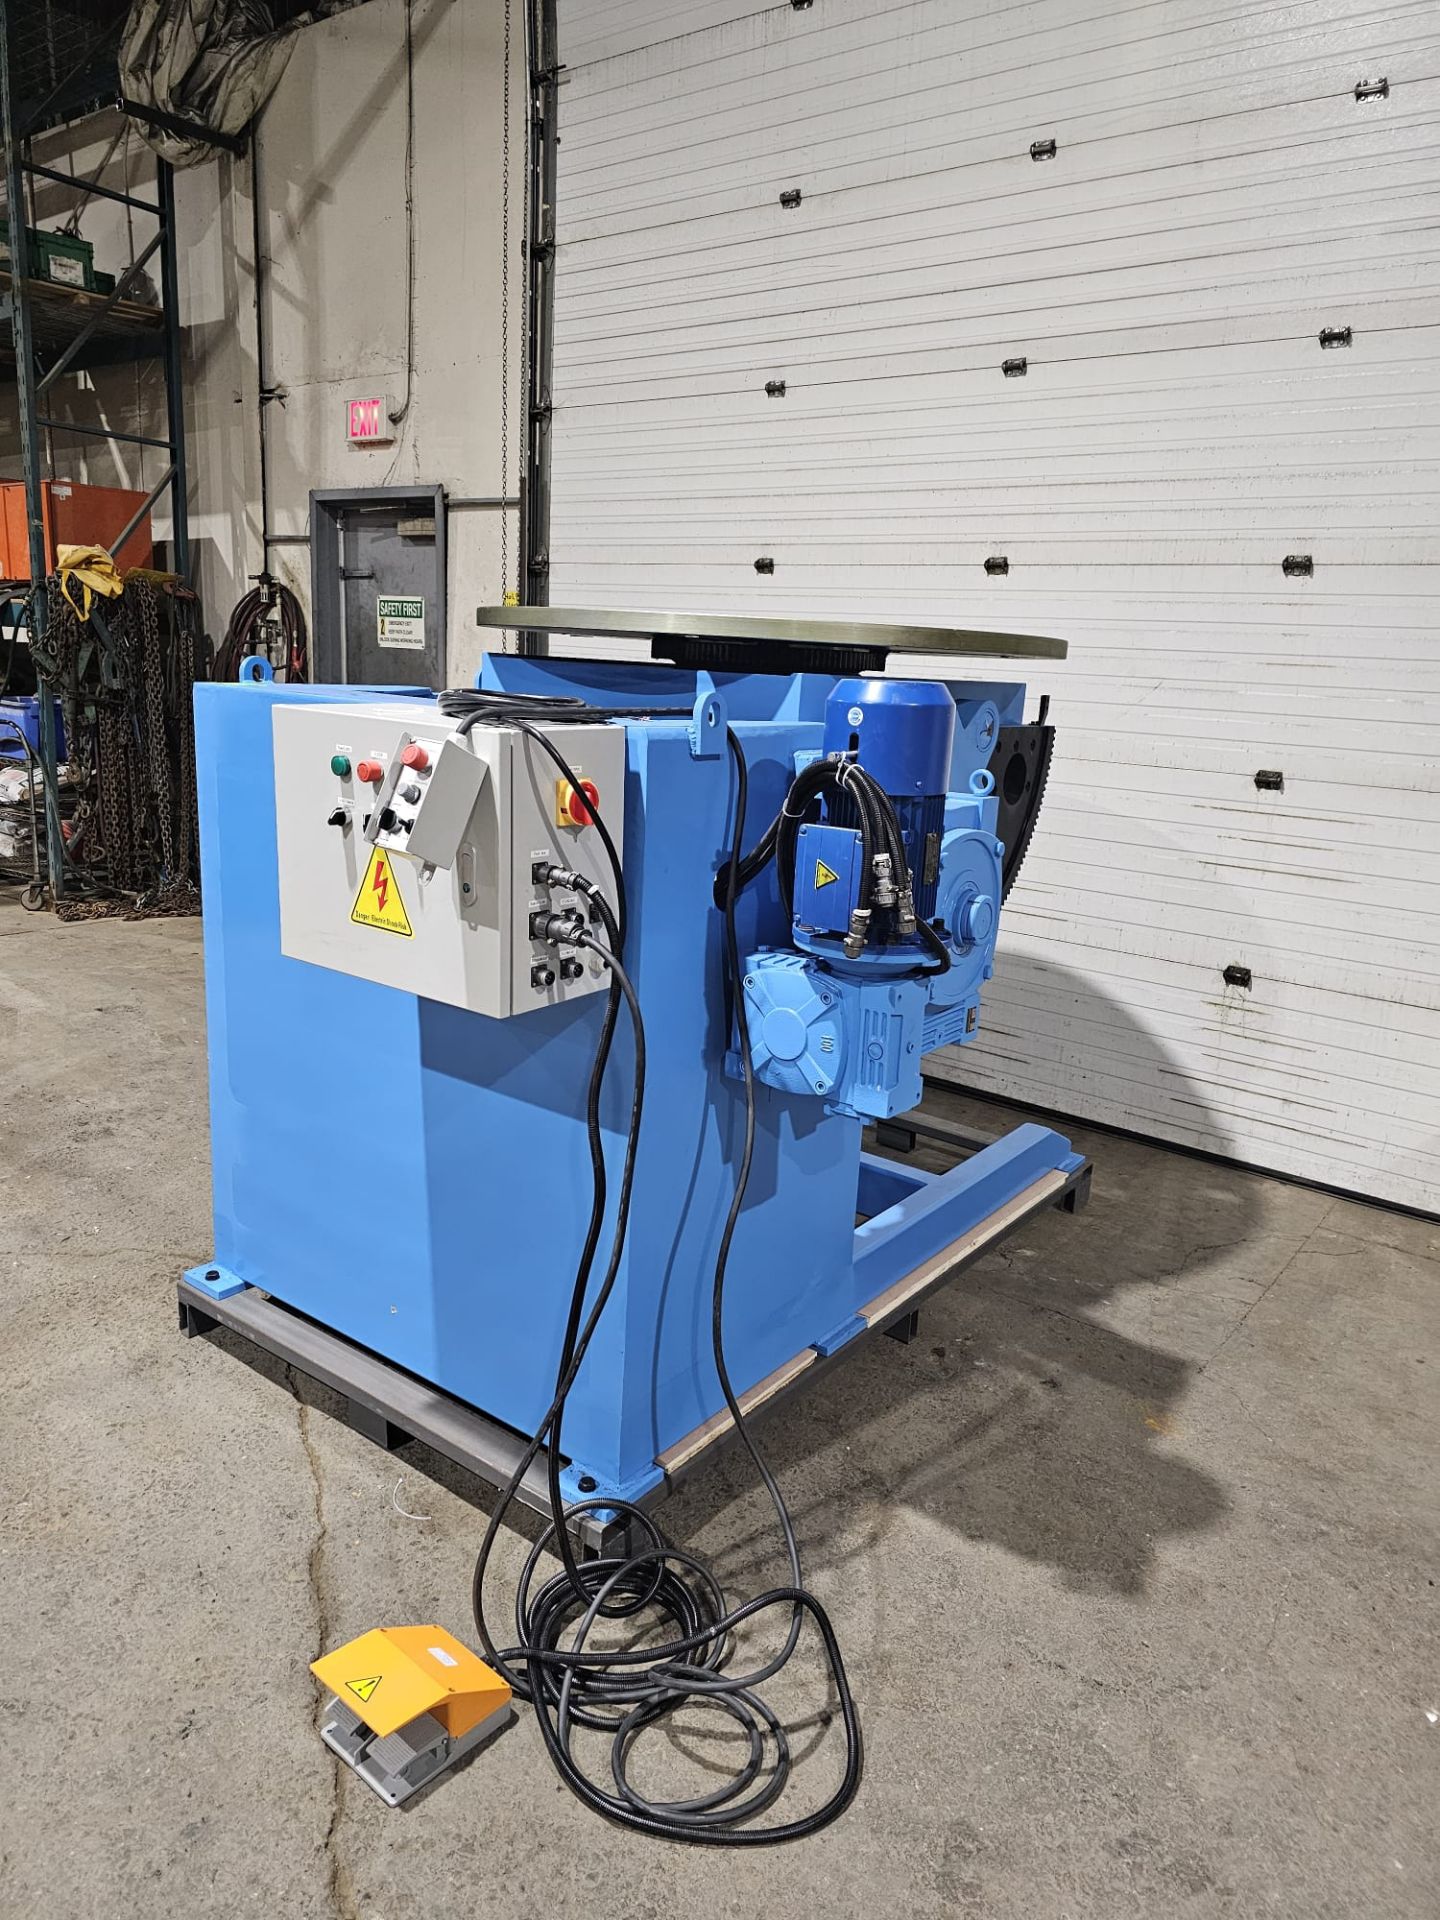 Verner model VD-8000 WELDING POSITIONER 8000lbs capacity - tilt and rotate with variable speed drive - Image 5 of 9